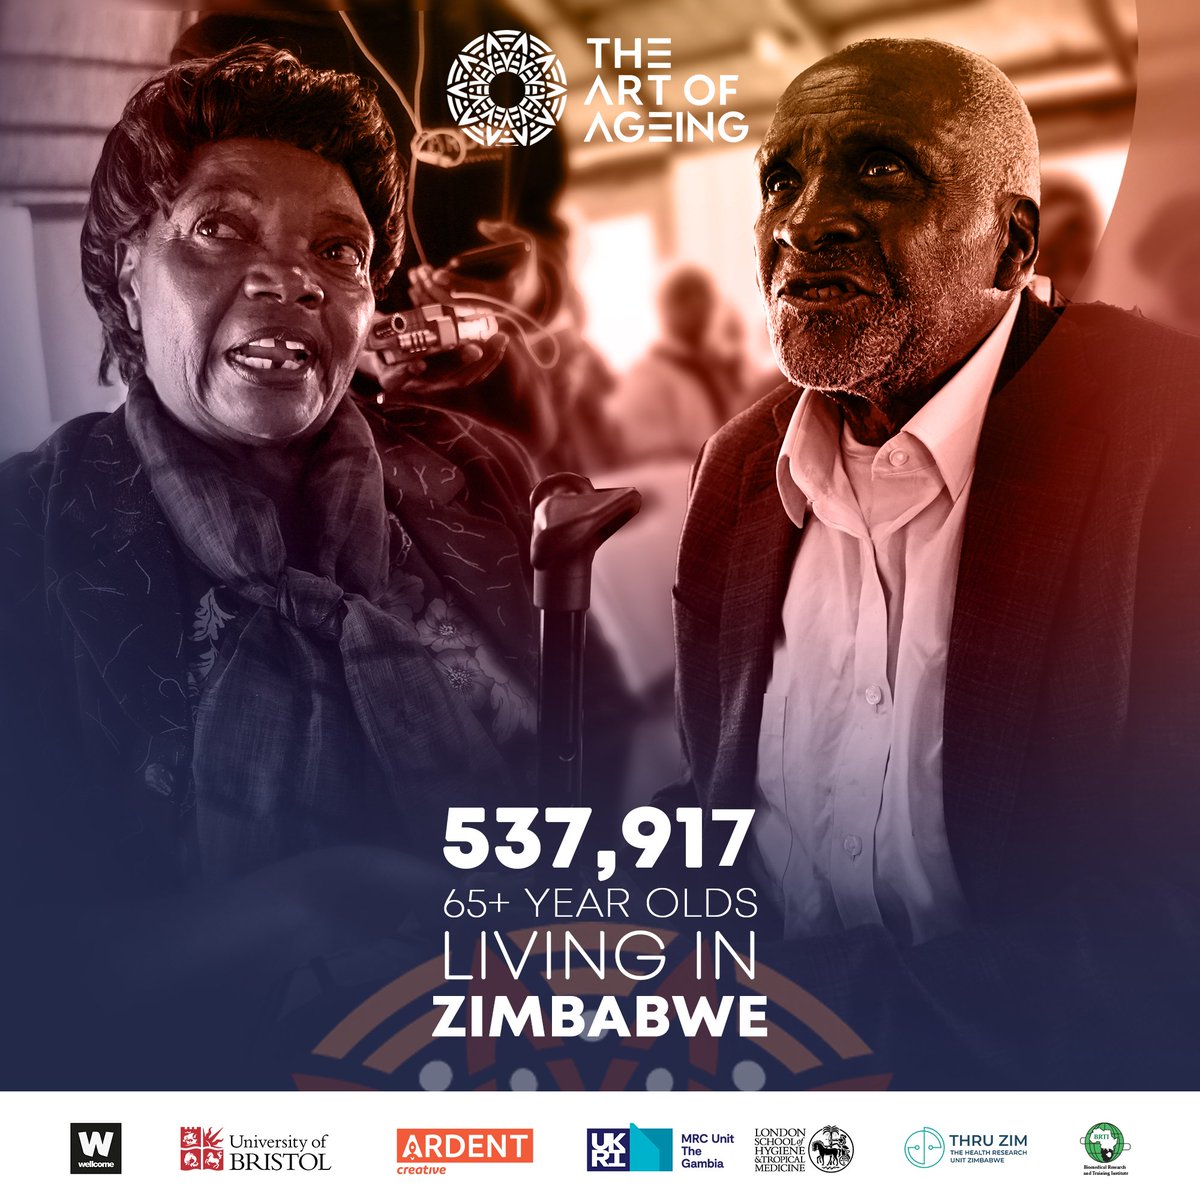 🌟✨ Fact Check Alert! 📢🔍 Did you know that there are over half a million 65+ year olds in Zimbabwe? 🇿🇼 Let's celebrate their wisdom and experiences around healthy ageing while combating ageism. 🌱✨💪 👵👴 #ArtOfAgeing #HealthyAgeing